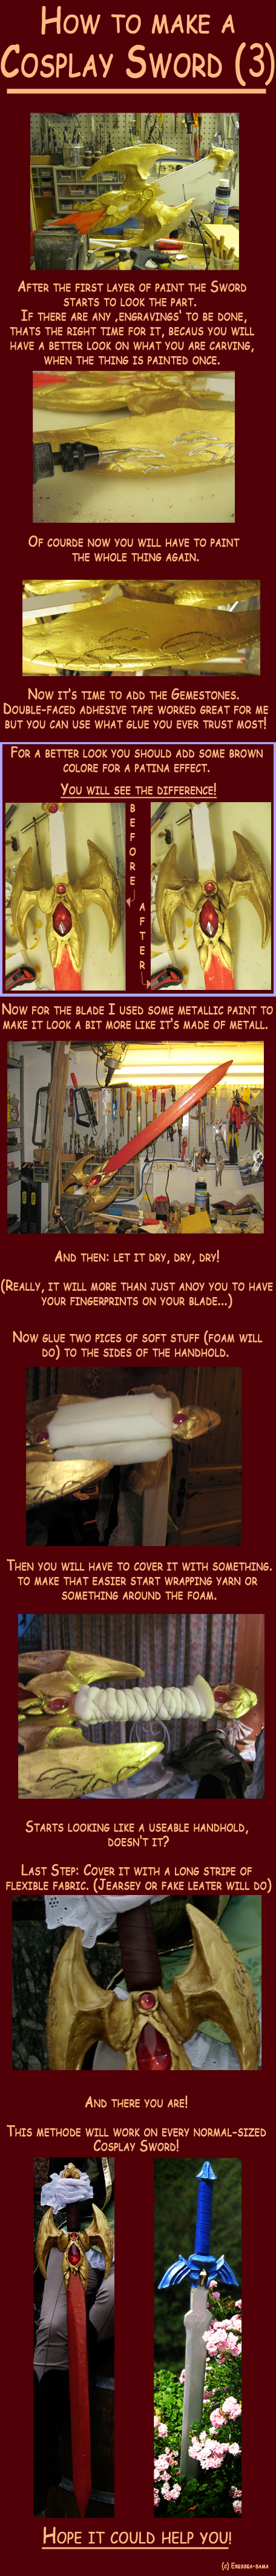 How to make a Cosplay Sword 3